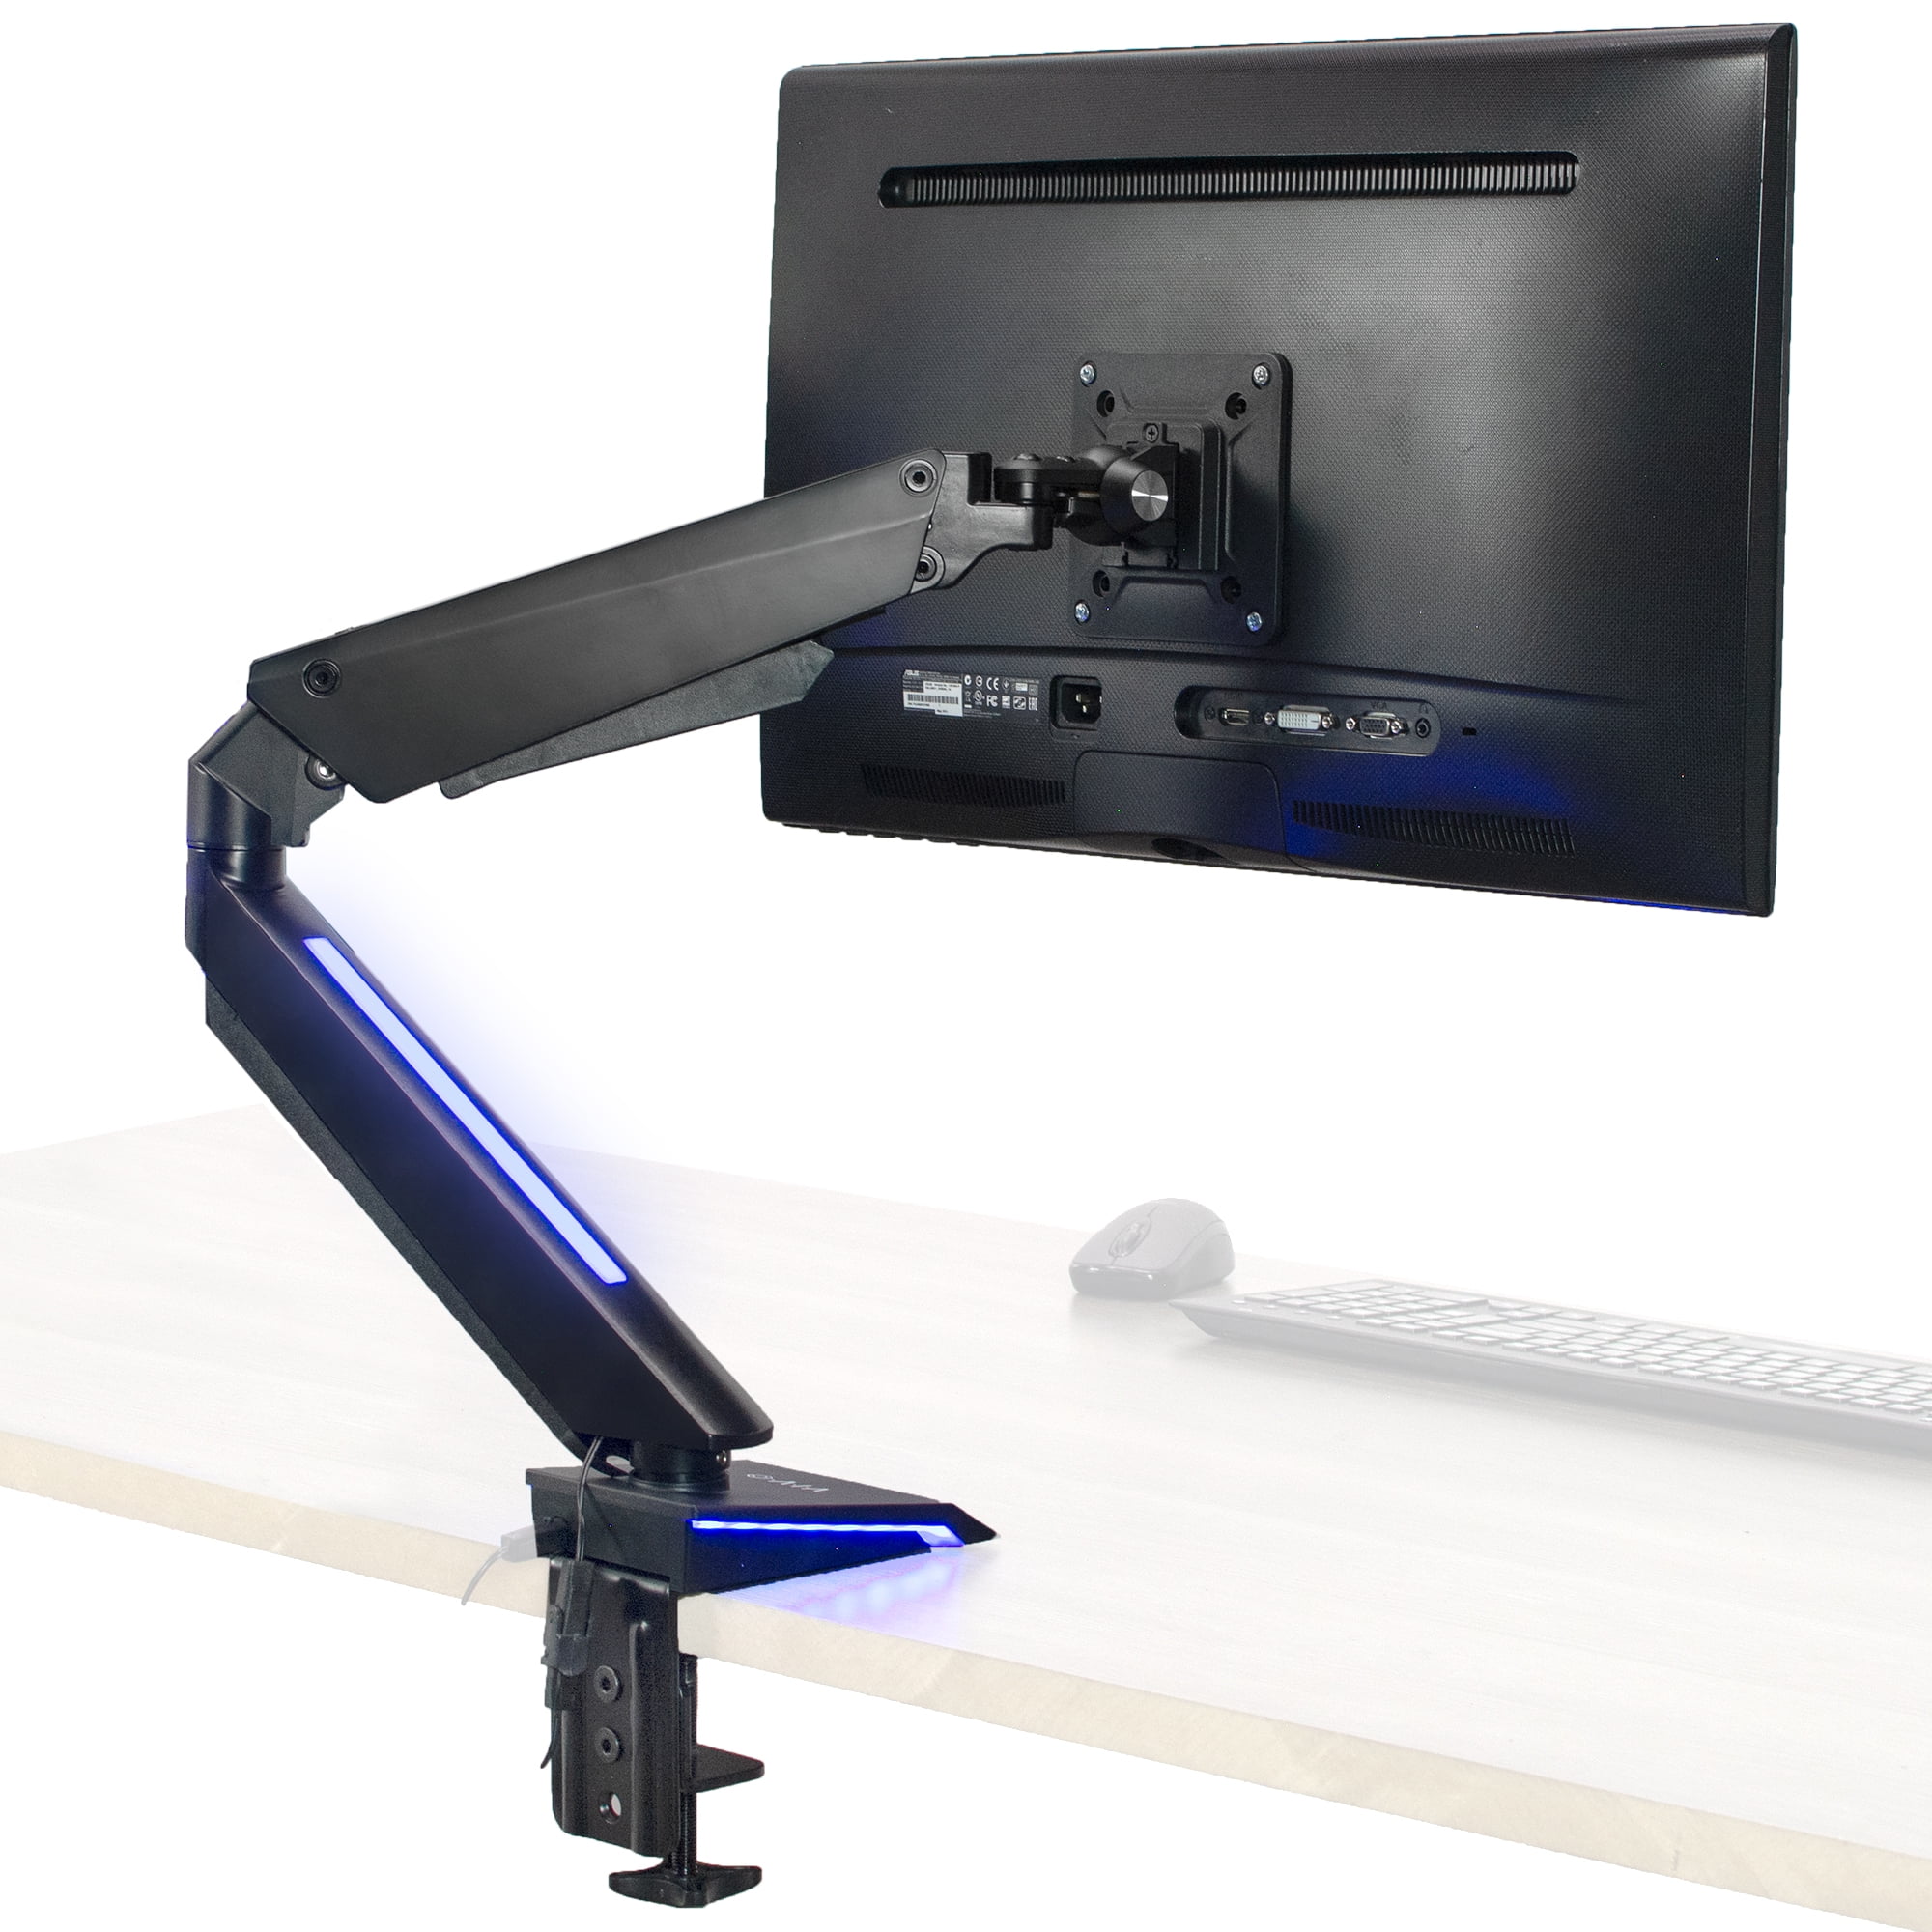 VIVO Single Monitor Gaming Mount Desk Stand w/ LED Lights for Screens ...